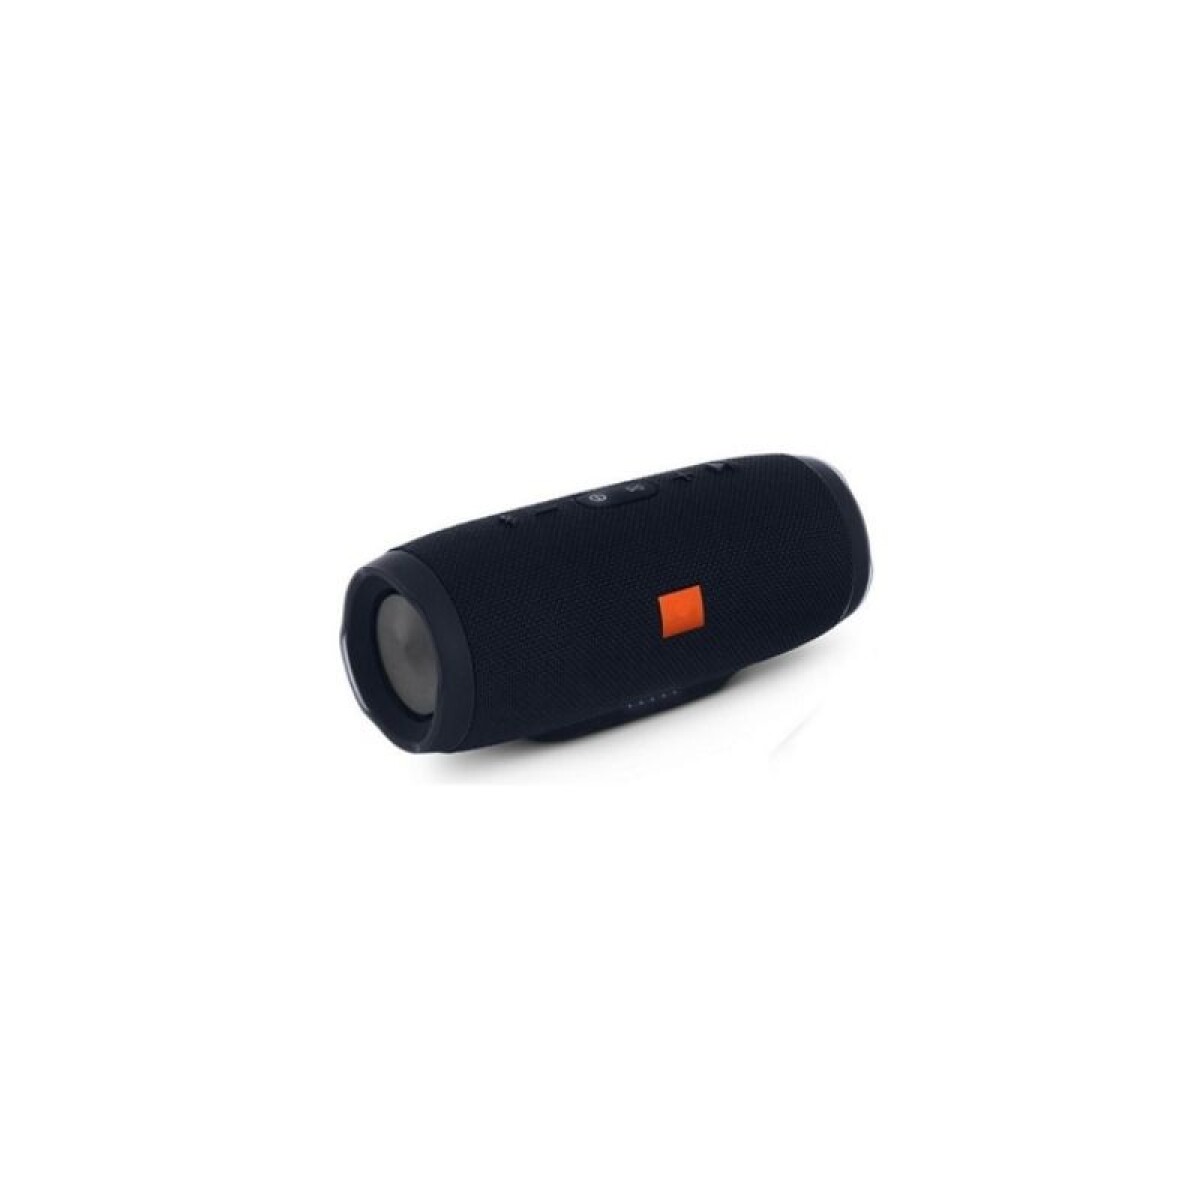 Parlante bluetooth Charge negro 